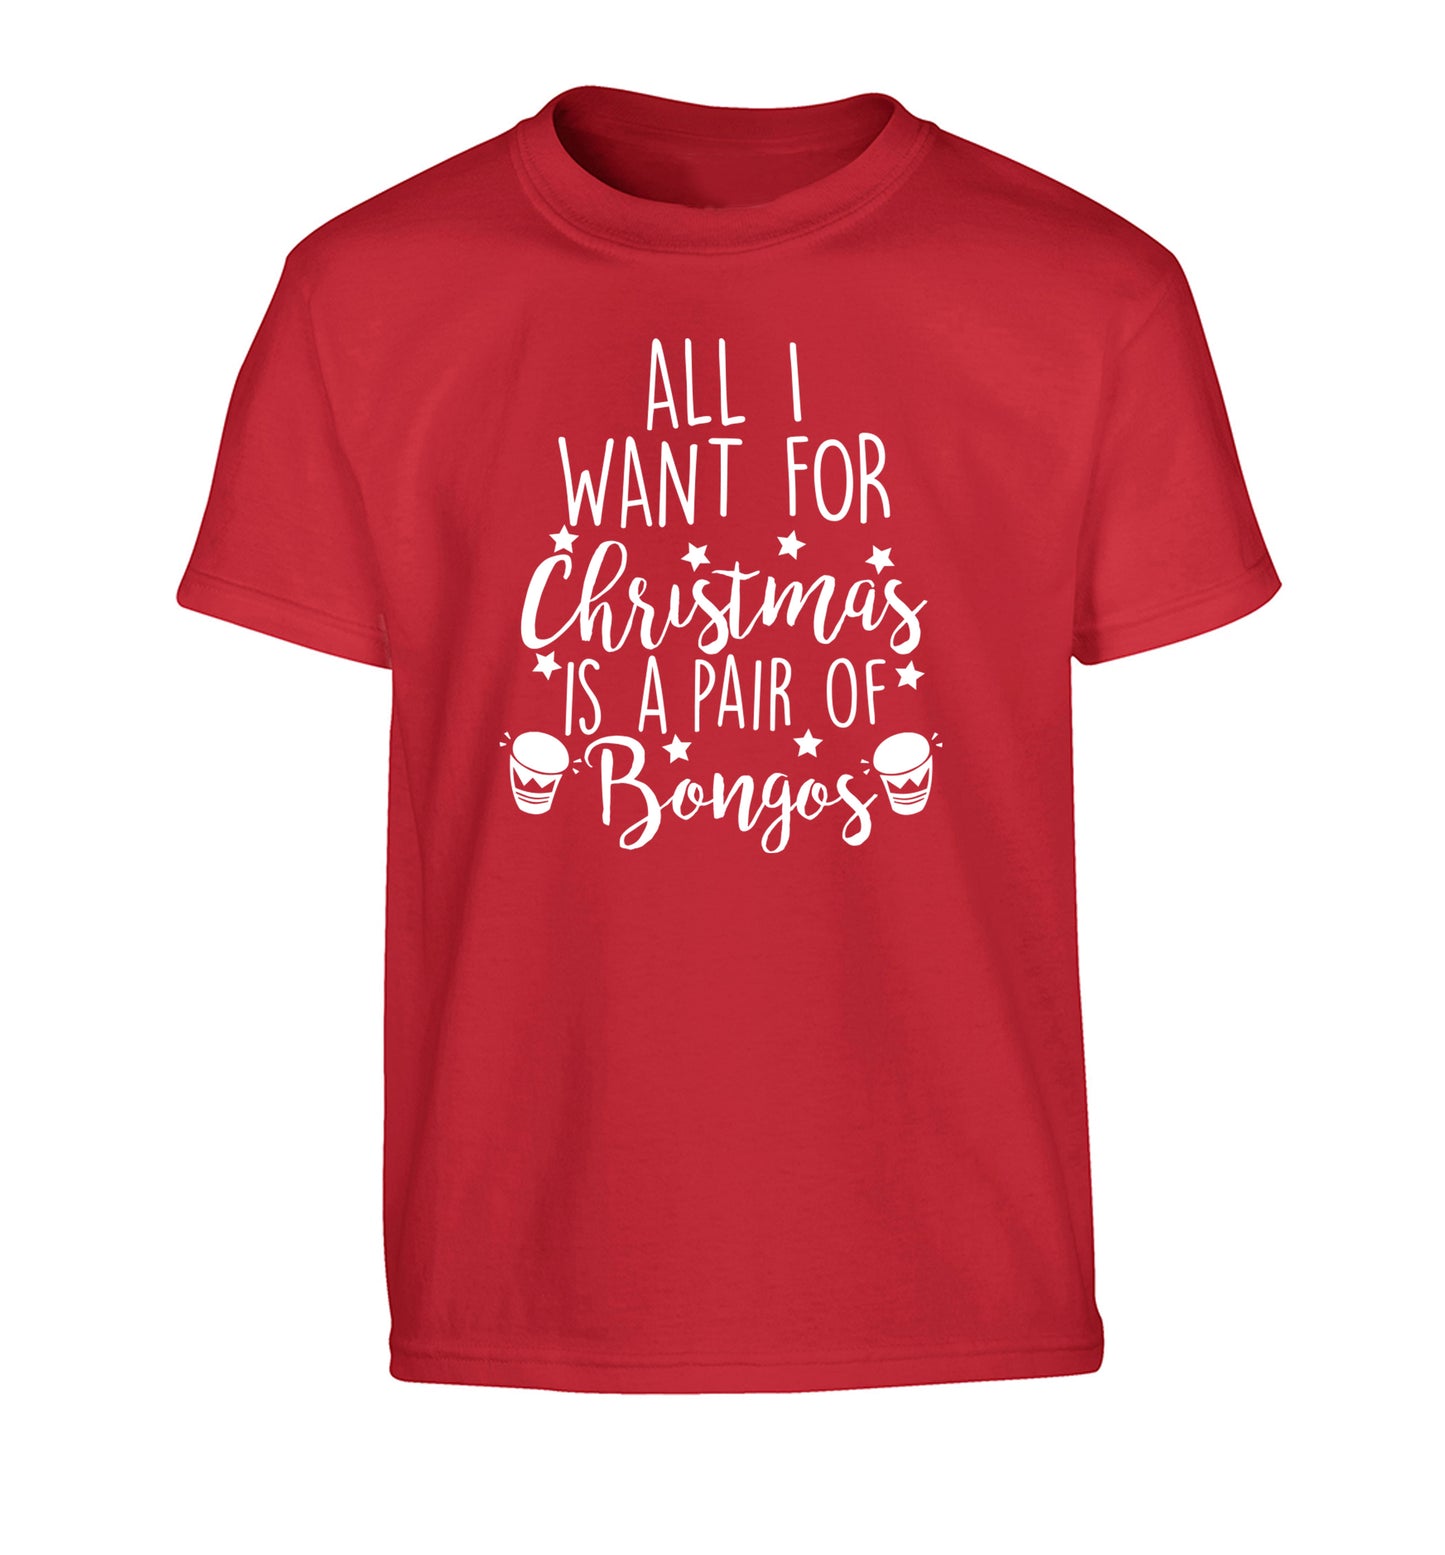 All I want for Christmas is a pair of bongos! Children's red Tshirt 12-14 Years